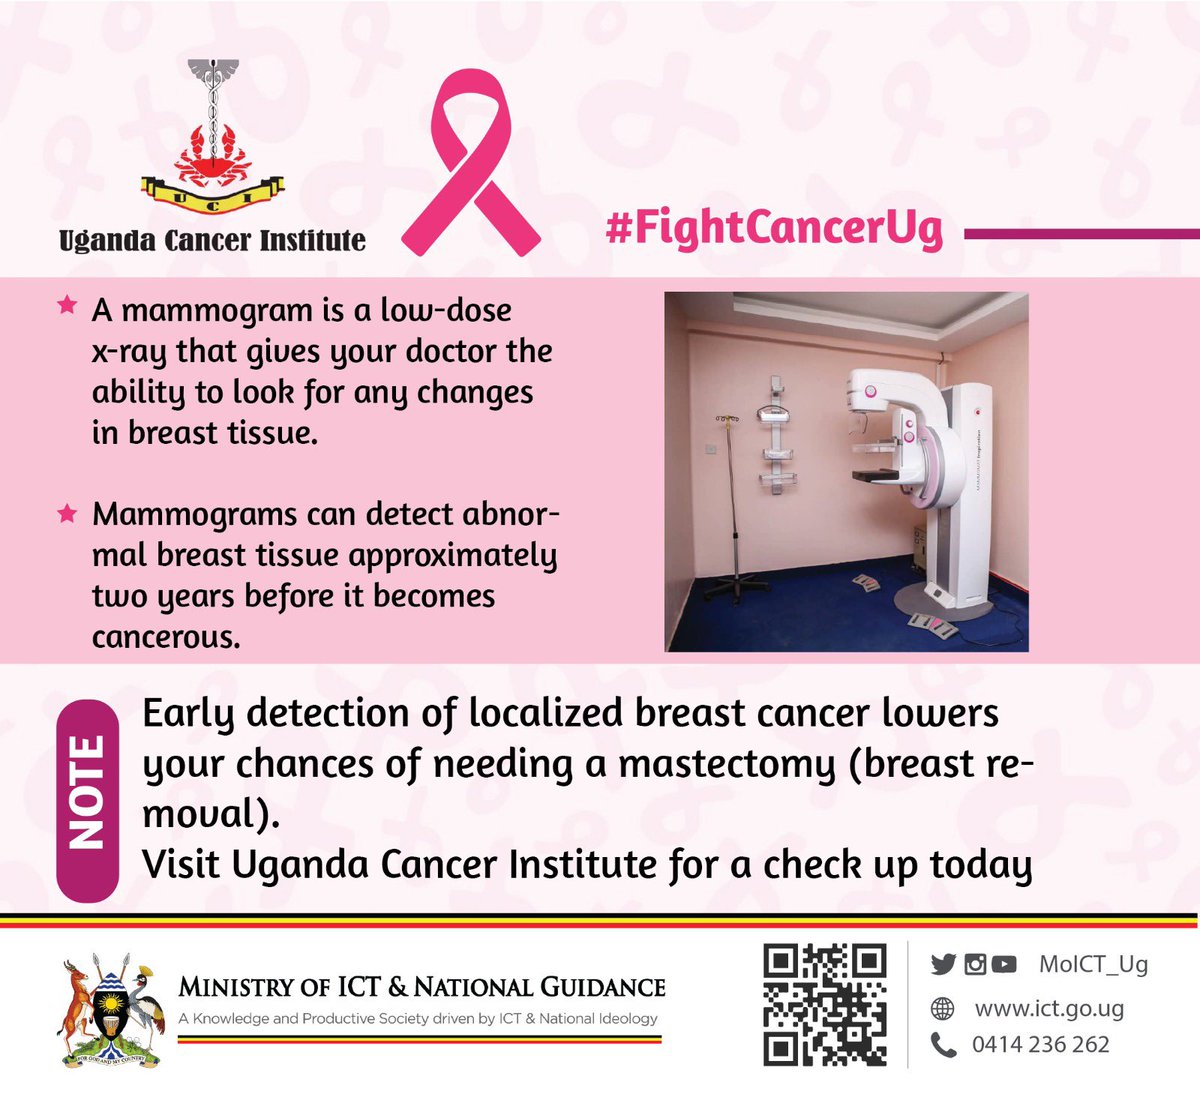 Mammograms can detect abnormal breast tissue approximately two years before it becomes cancerous.
@UgandaCancerIns 

#FightCancerUg